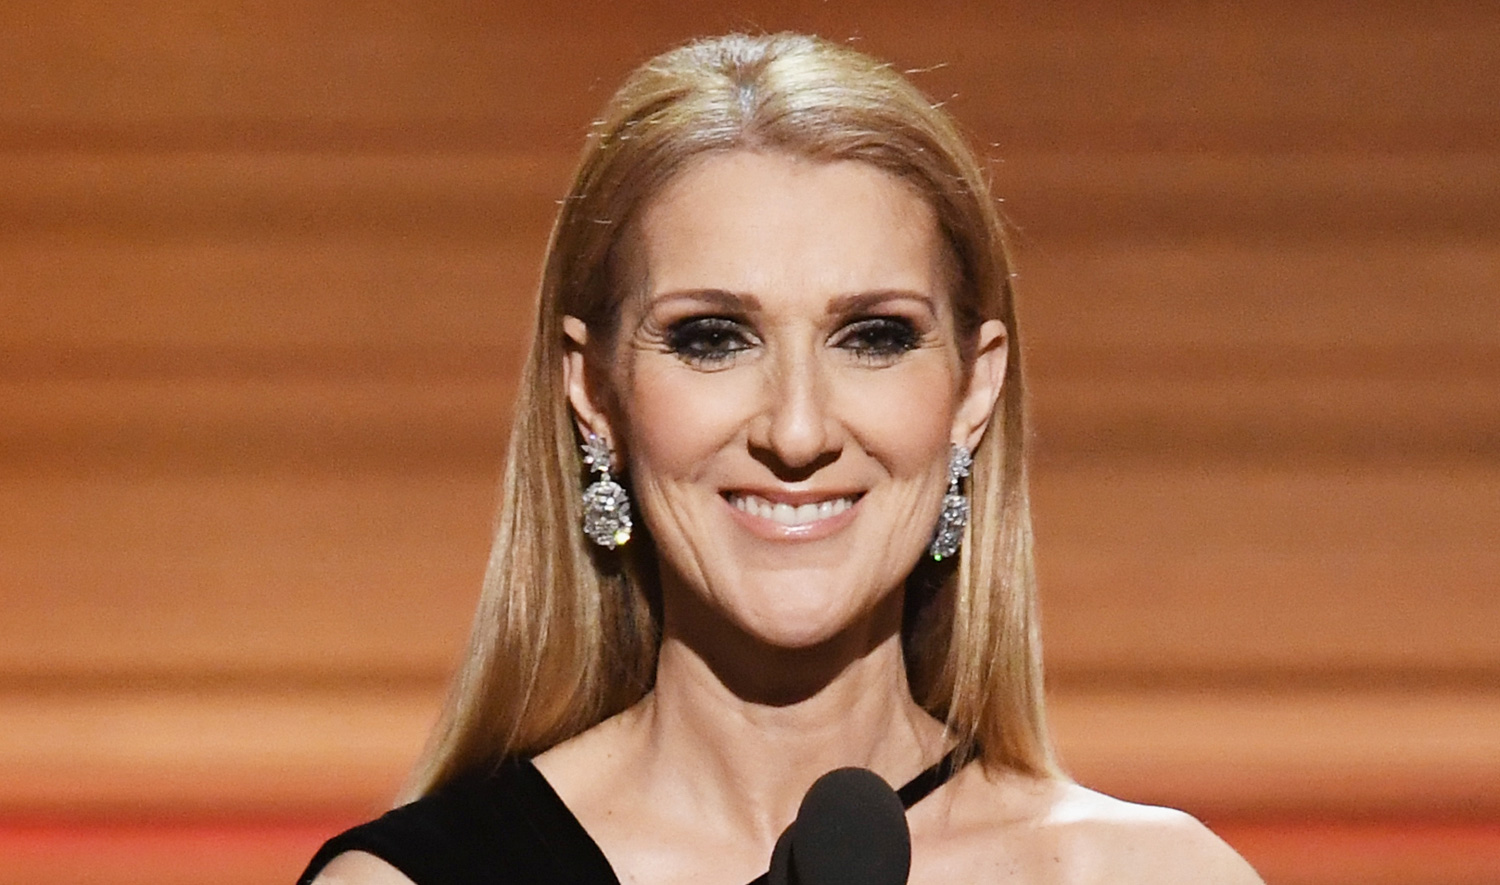 How much does Celine Dion make a year?